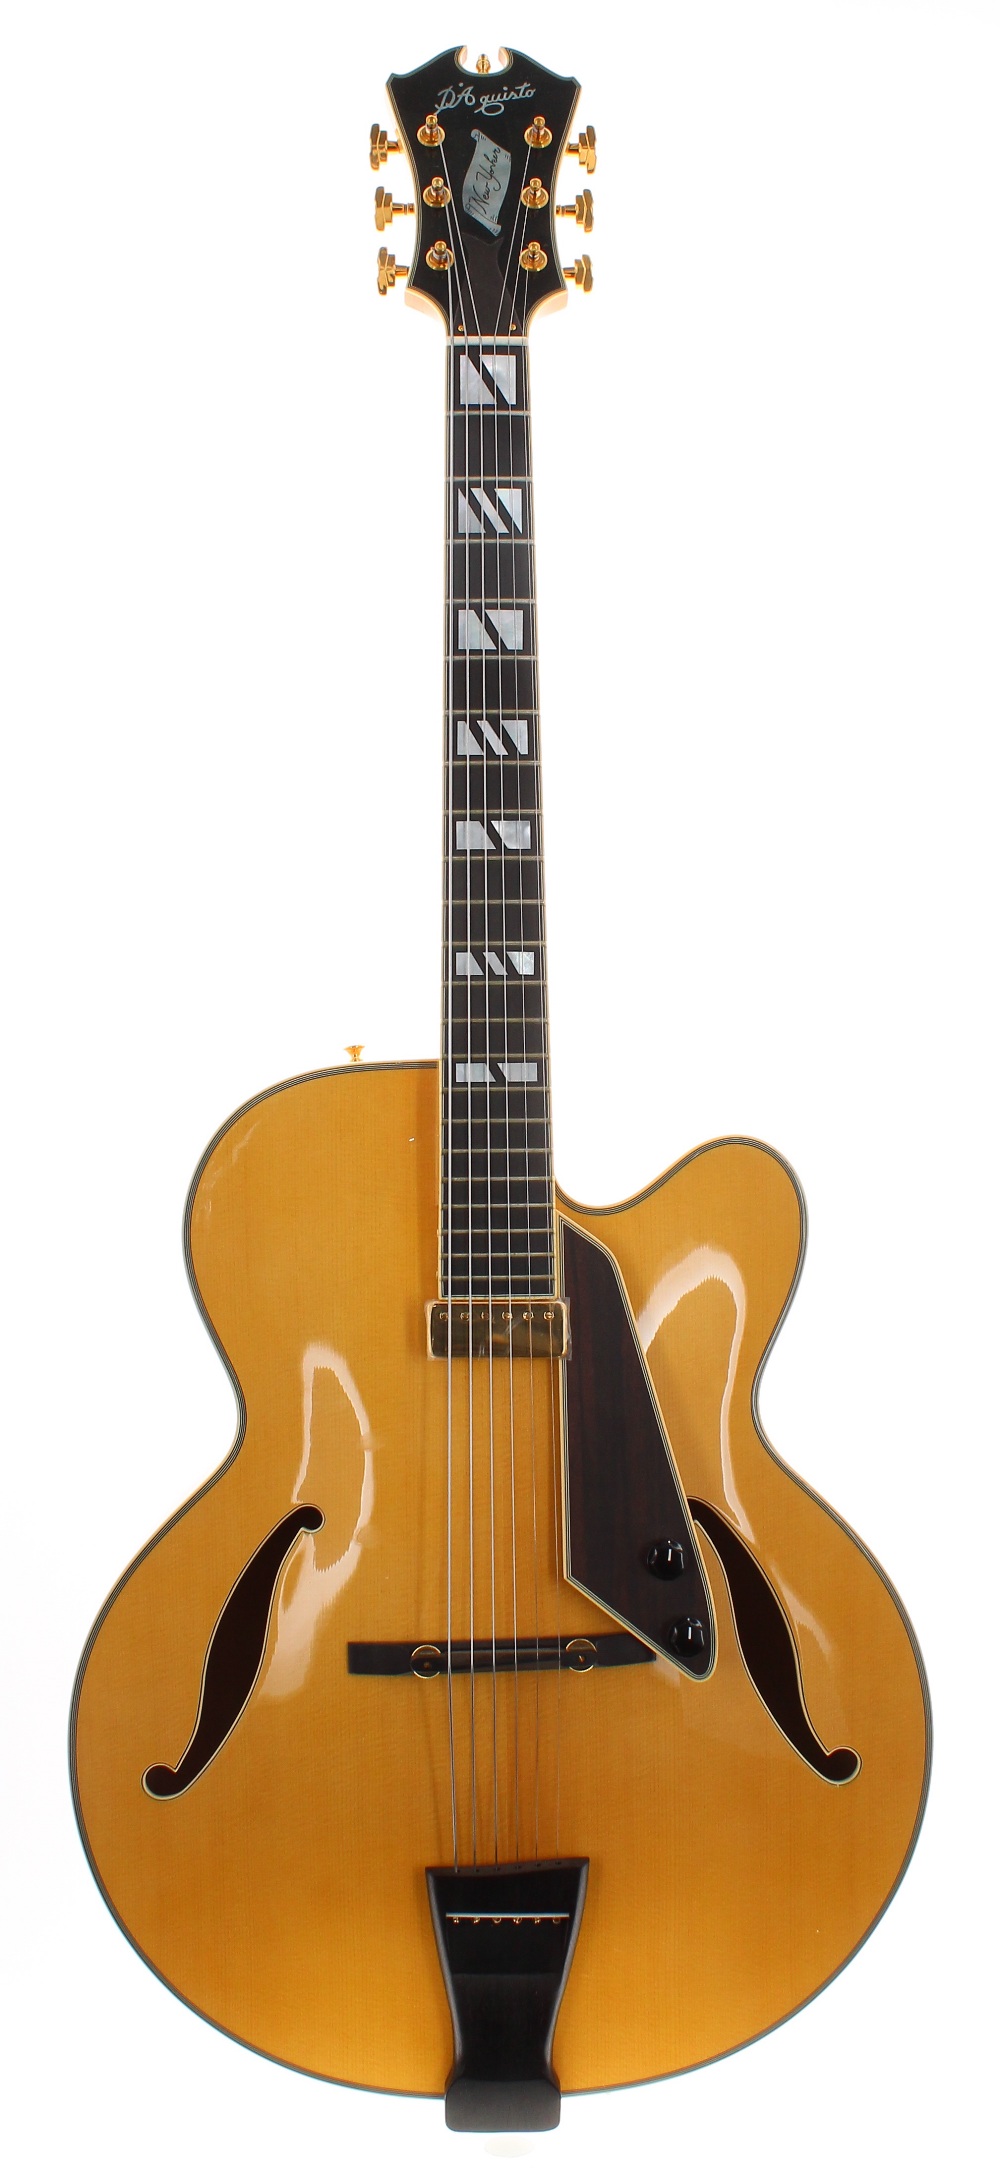 D'Aquisto New Yorker DQ-NYE electric archtop guitar, made in Japan, ser. no. 03xxxx1; Finish: